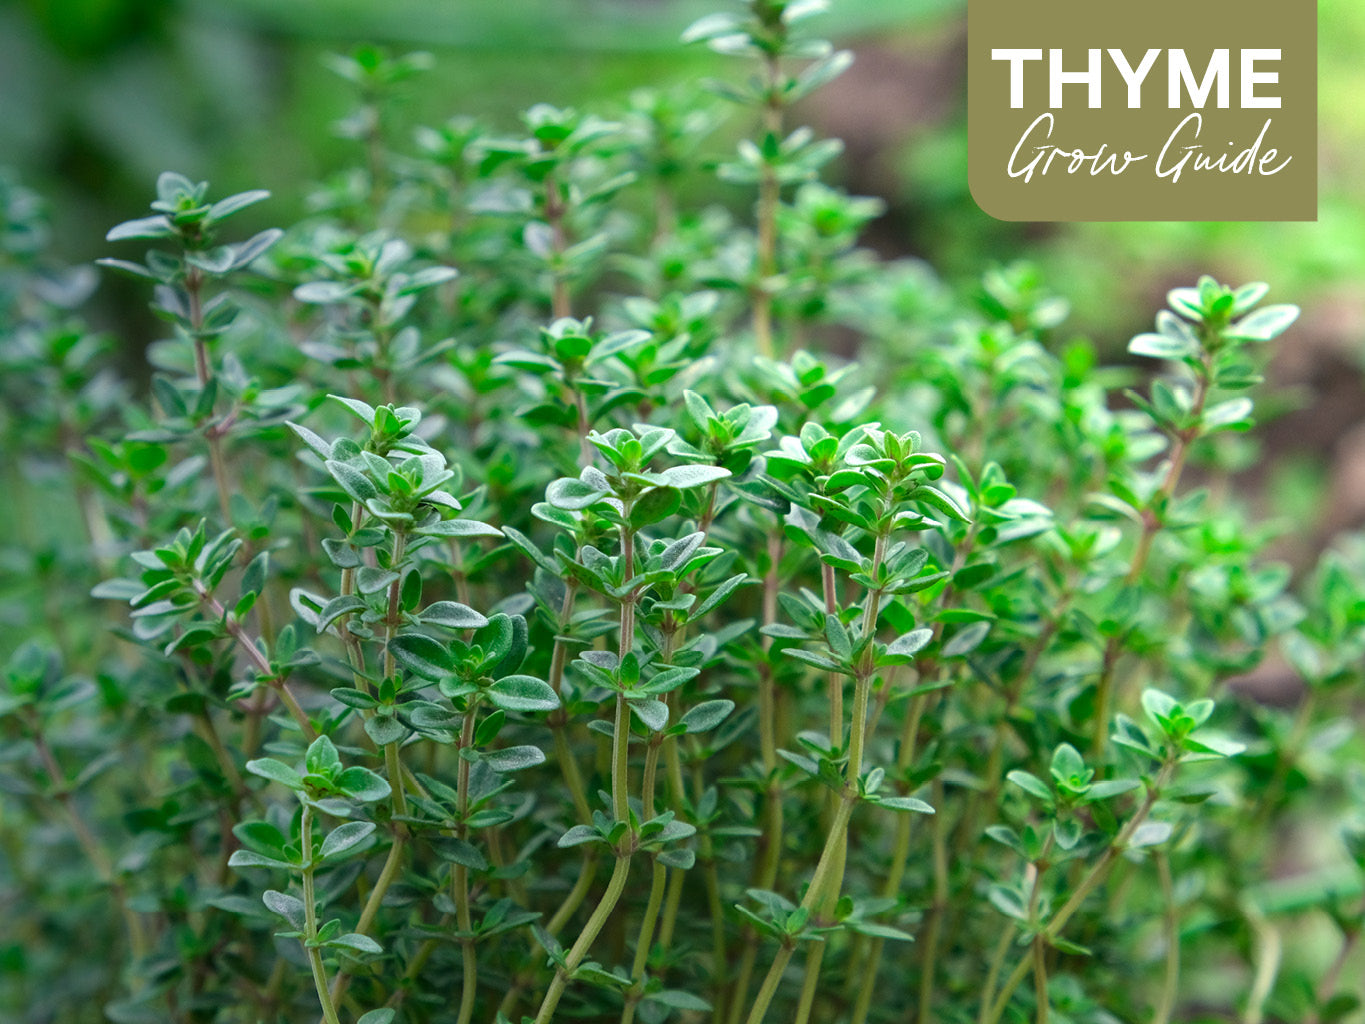 Thyme Grow Guide: How to Plant, Grow and Harvest Thyme